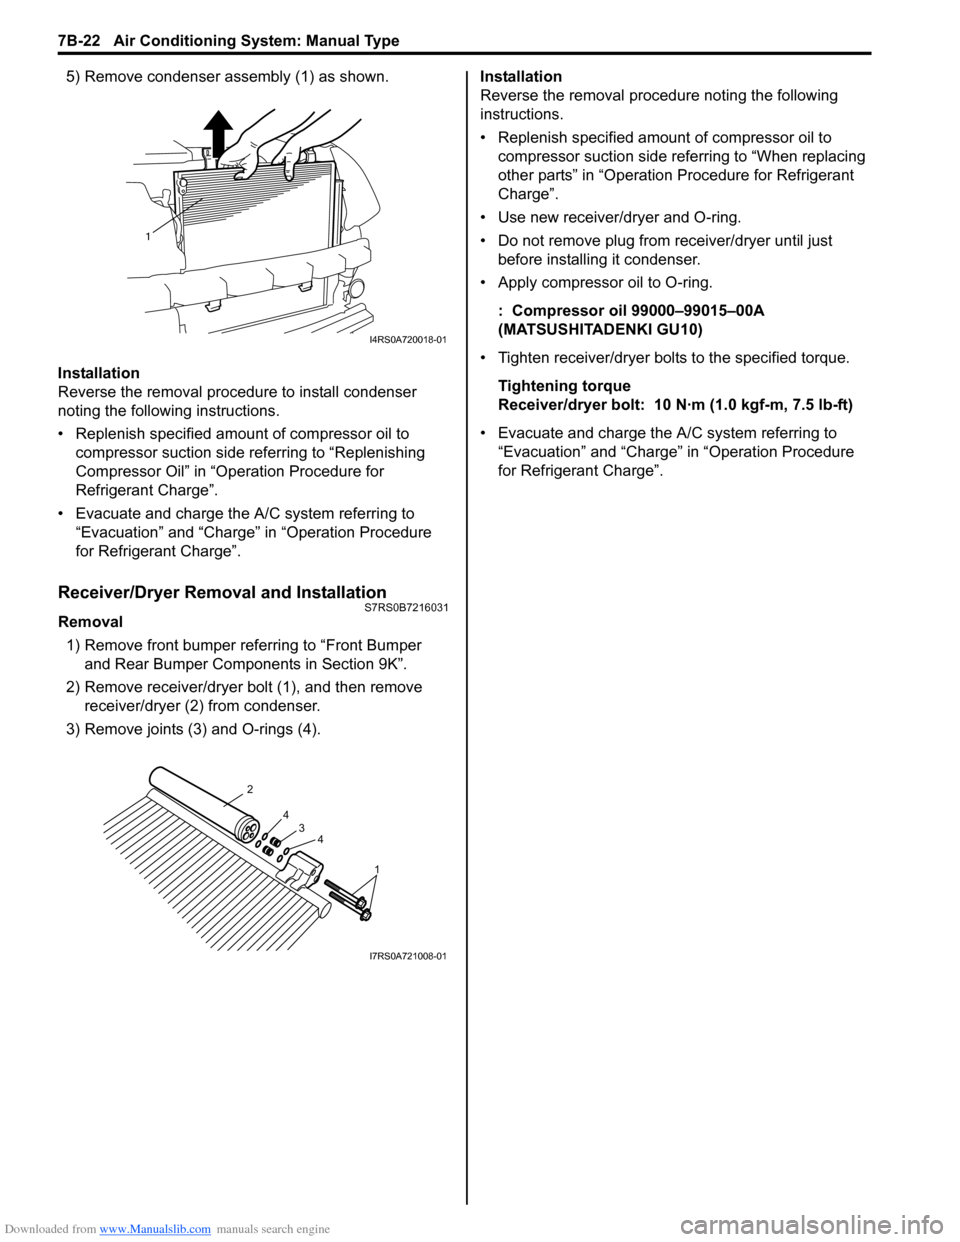 SUZUKI SWIFT 2006 2.G Service Workshop Manual Downloaded from www.Manualslib.com manuals search engine 7B-22 Air Conditioning System: Manual Type
5) Remove condenser assembly (1) as shown.
Installation
Reverse the removal procedure to install con